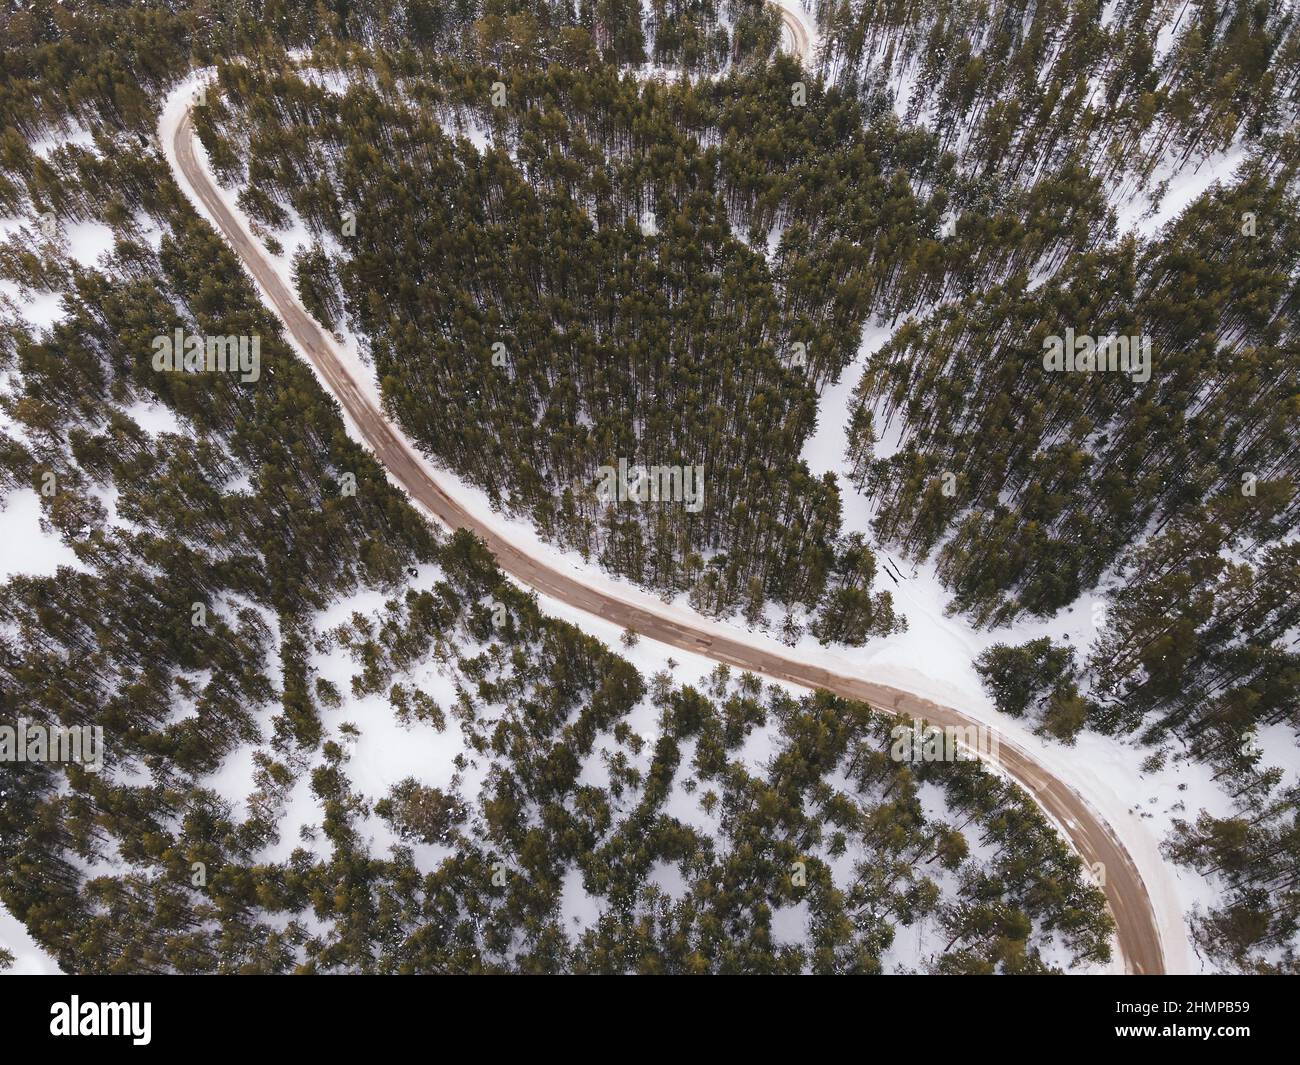 Winding Road In Winter Landscape. Aerial view from drone of road among trees in snowy forest. Stock Photo